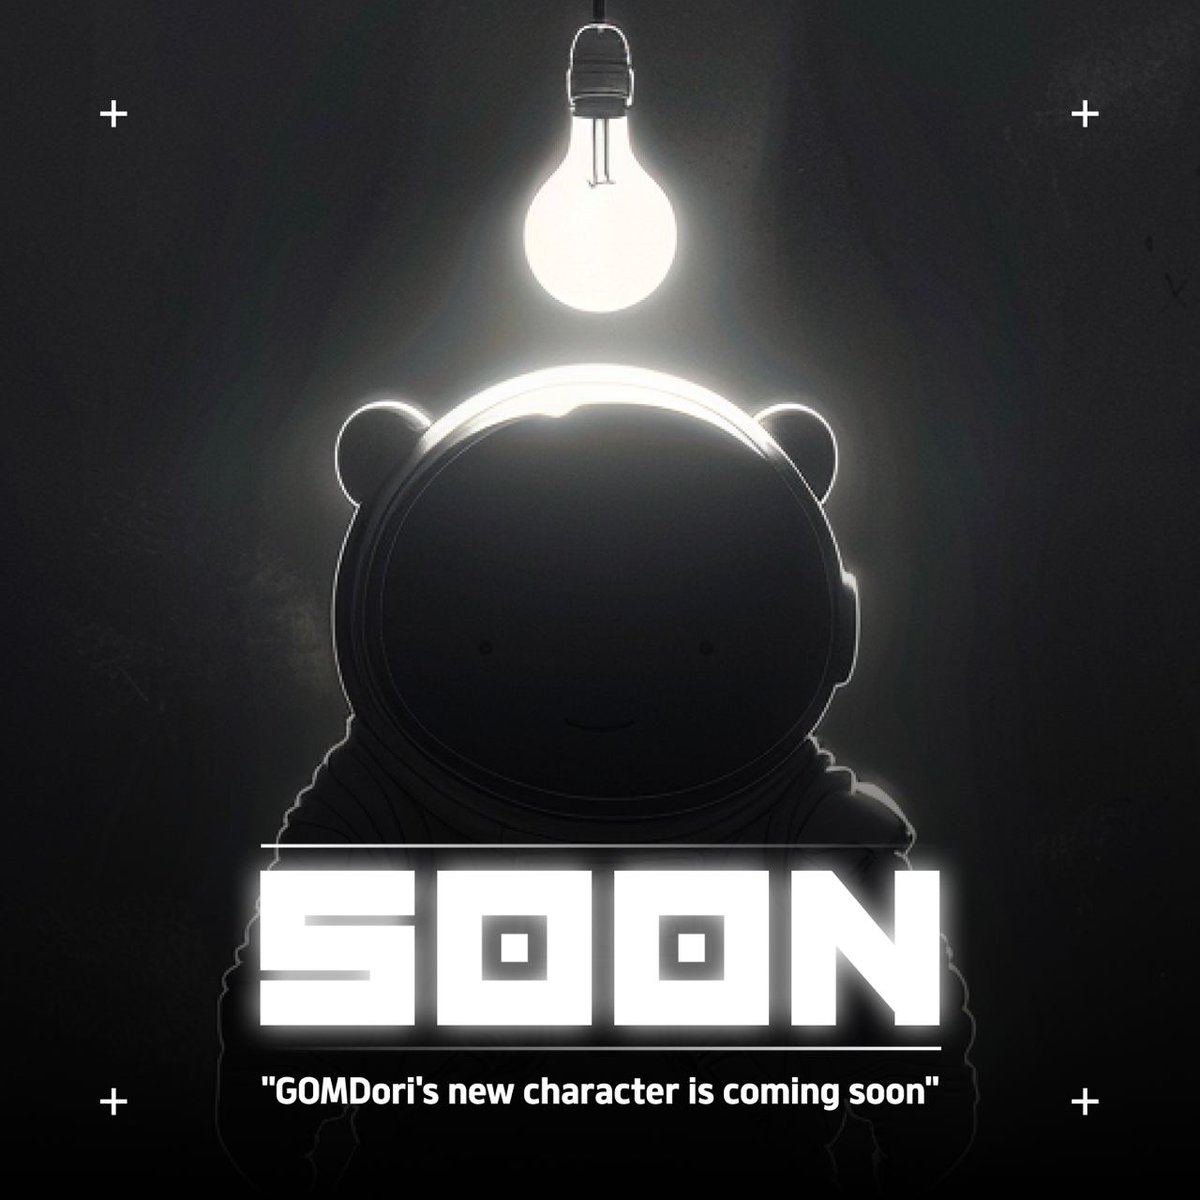 Stay updated on potential announcements and the full character transformation of GOMDori! 🚀 Explore the journey of this character, with exciting potential to become NFTs. Don't miss out on the latest developments! #GOMDori #NFTs #DigitalArt